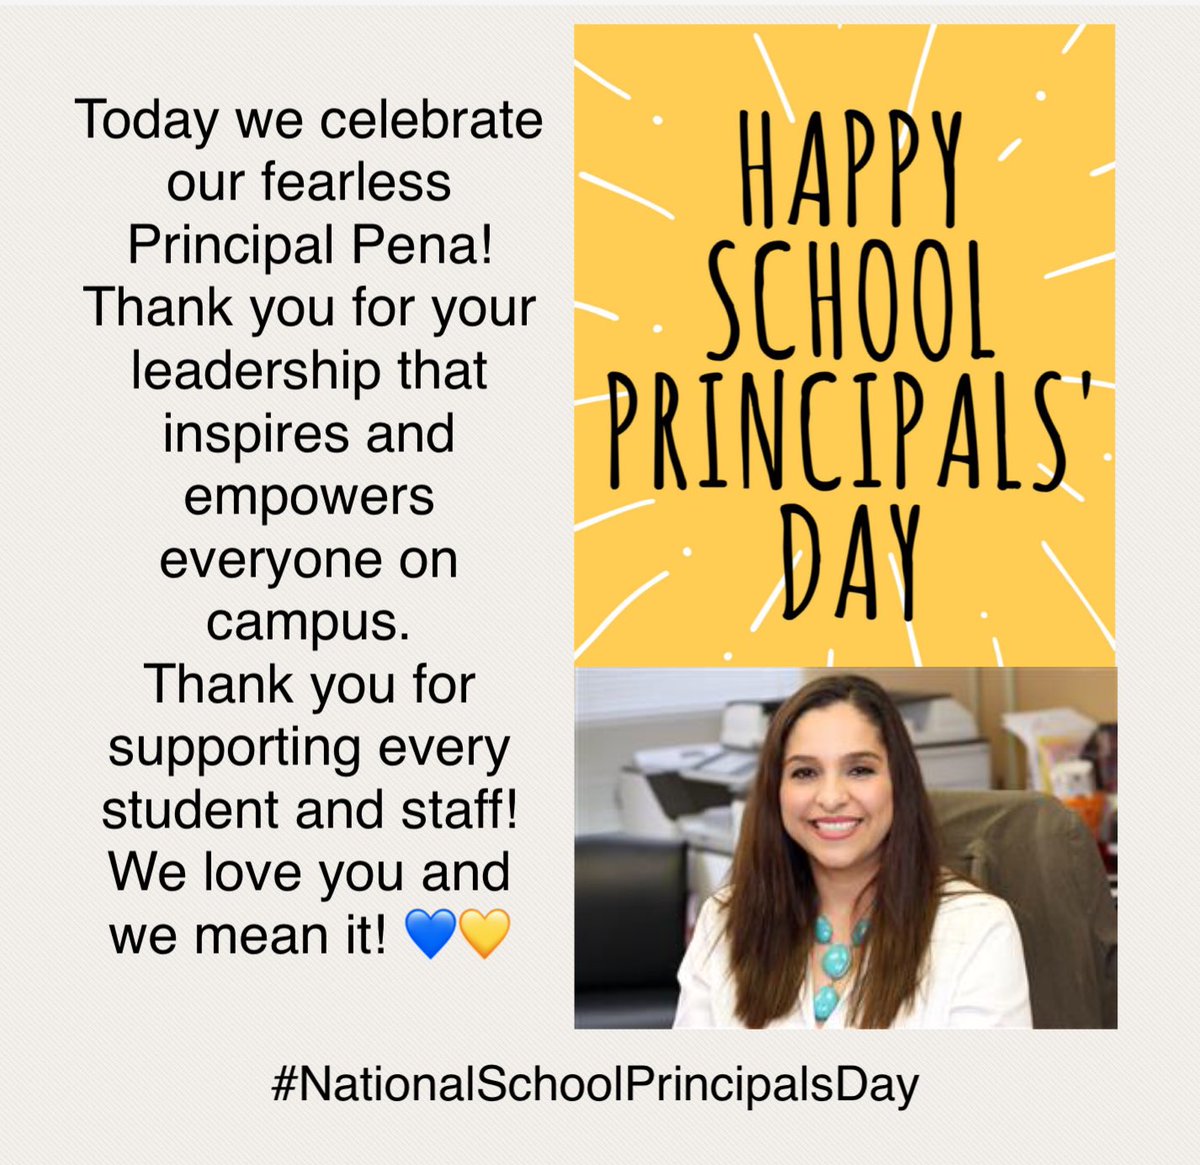 May 1st is #NationalSchoolPrincipalDay.  We are so thankful for Principal Peña and everything she does each day for our students, staff, families and community. #weloveyouandwemeanit